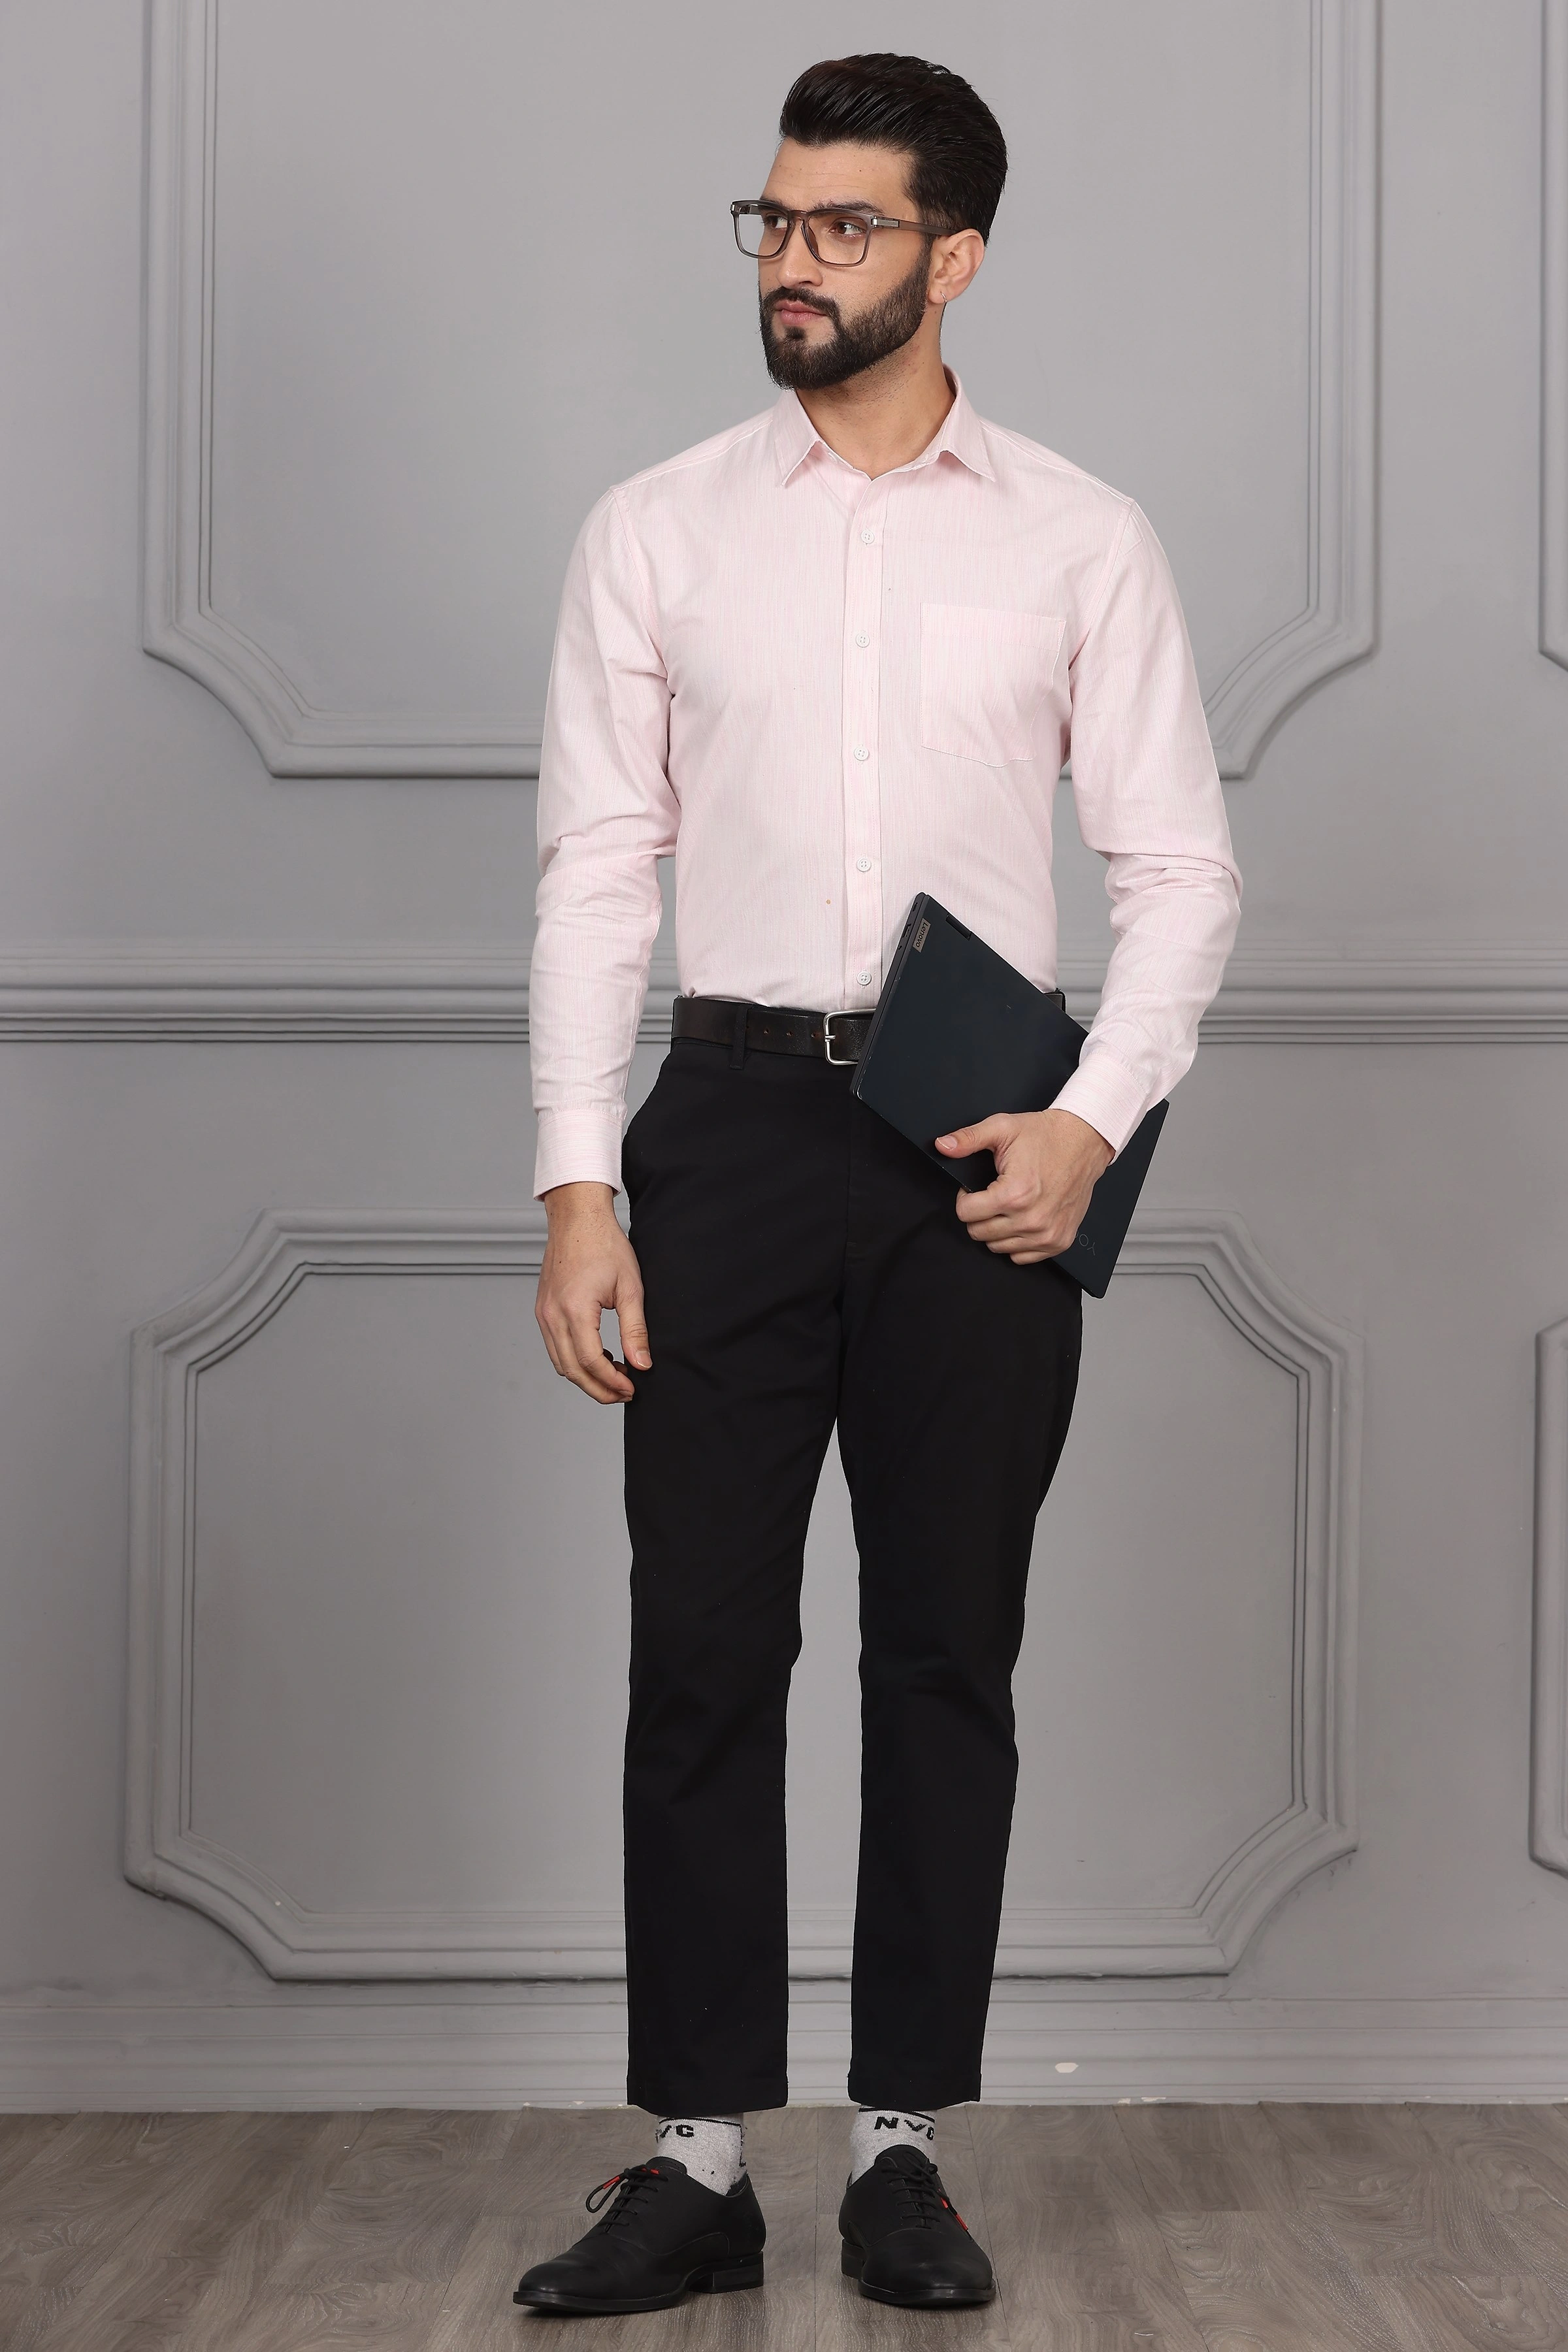 Textured Pink White Business Formal Cotton Shirt-S-3